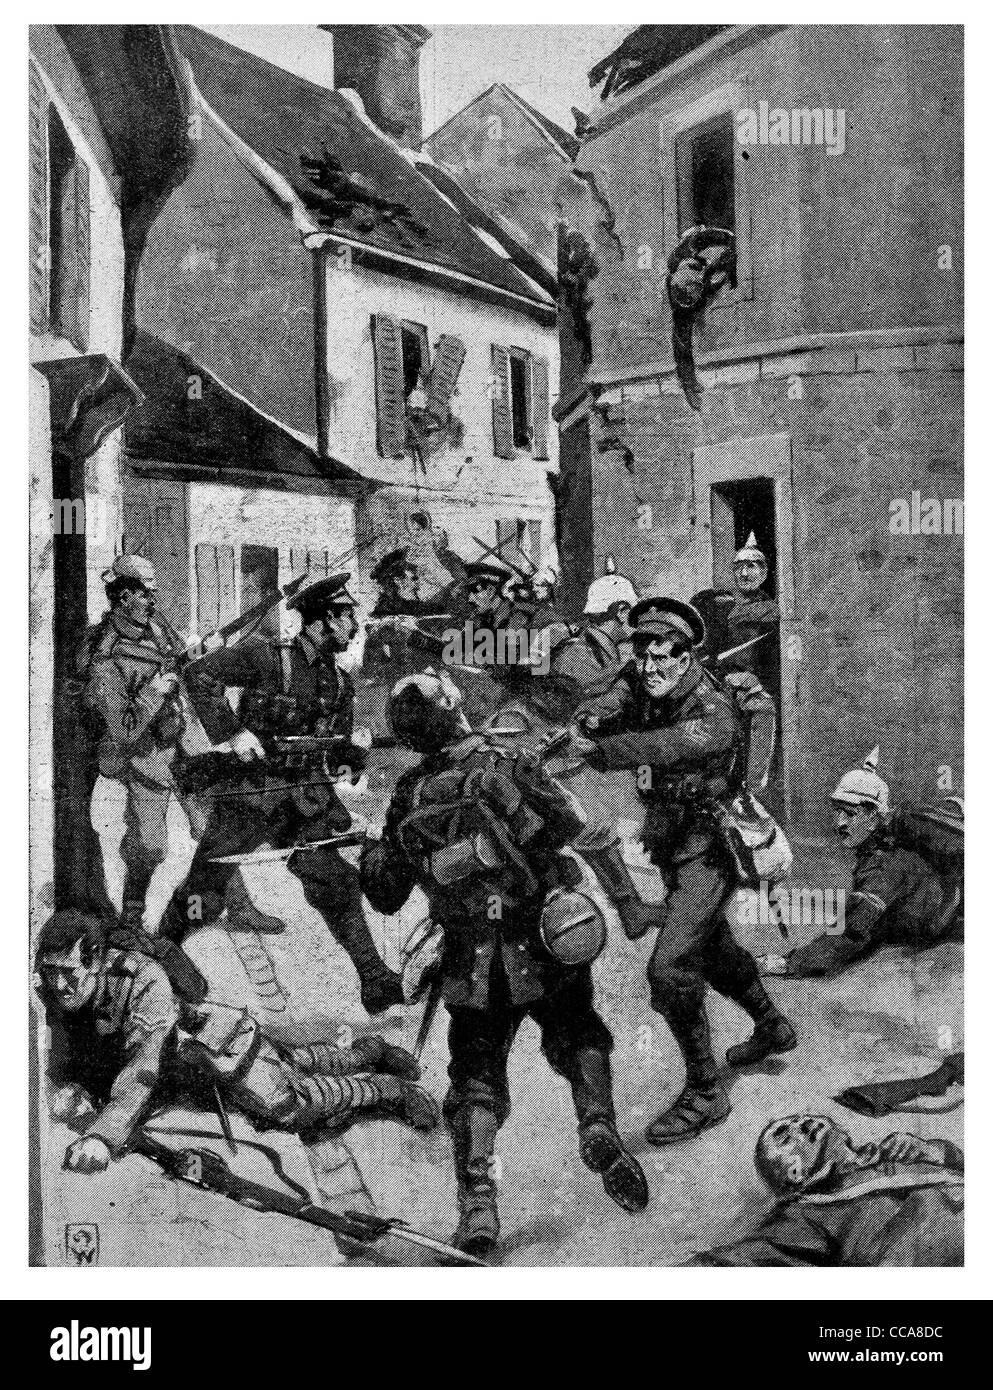 1915 hand to hand street fighting Loos September 25th house to house combat rifle bayonet dead bodies body terror shock Stock Photo